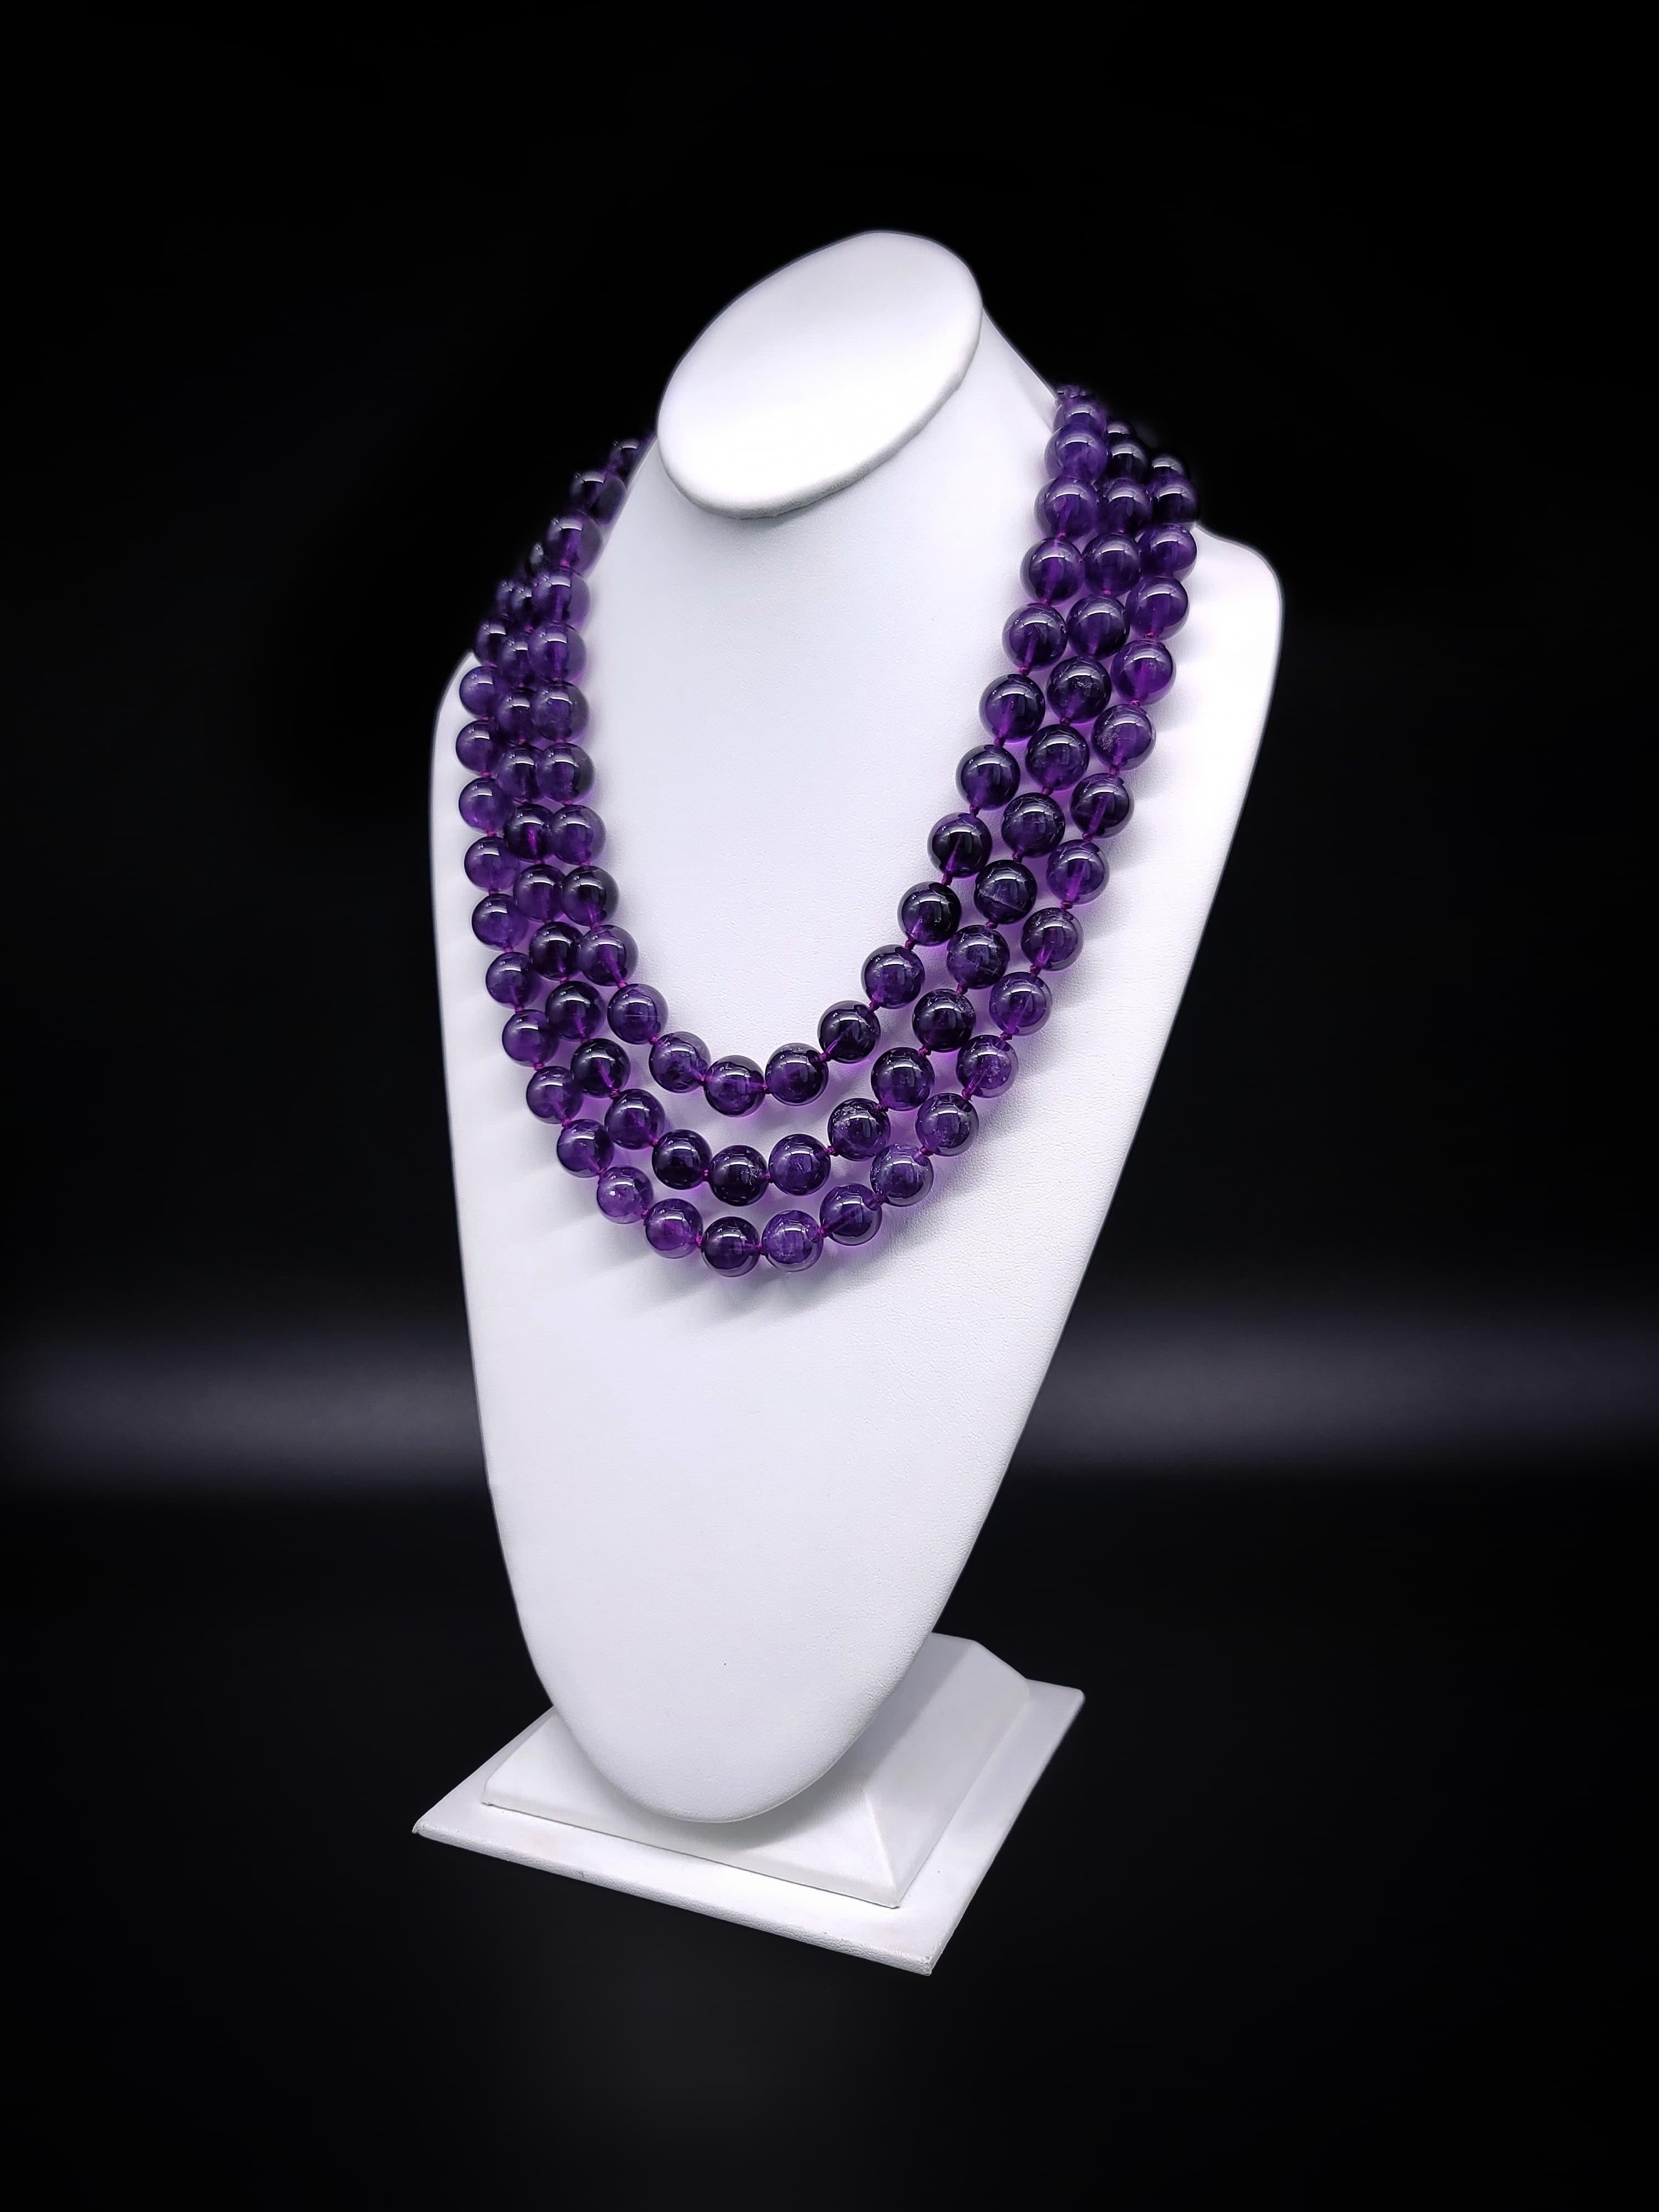 A.Jeschel  Amethyst necklace with a Vintage Venetian glass clasp. 4